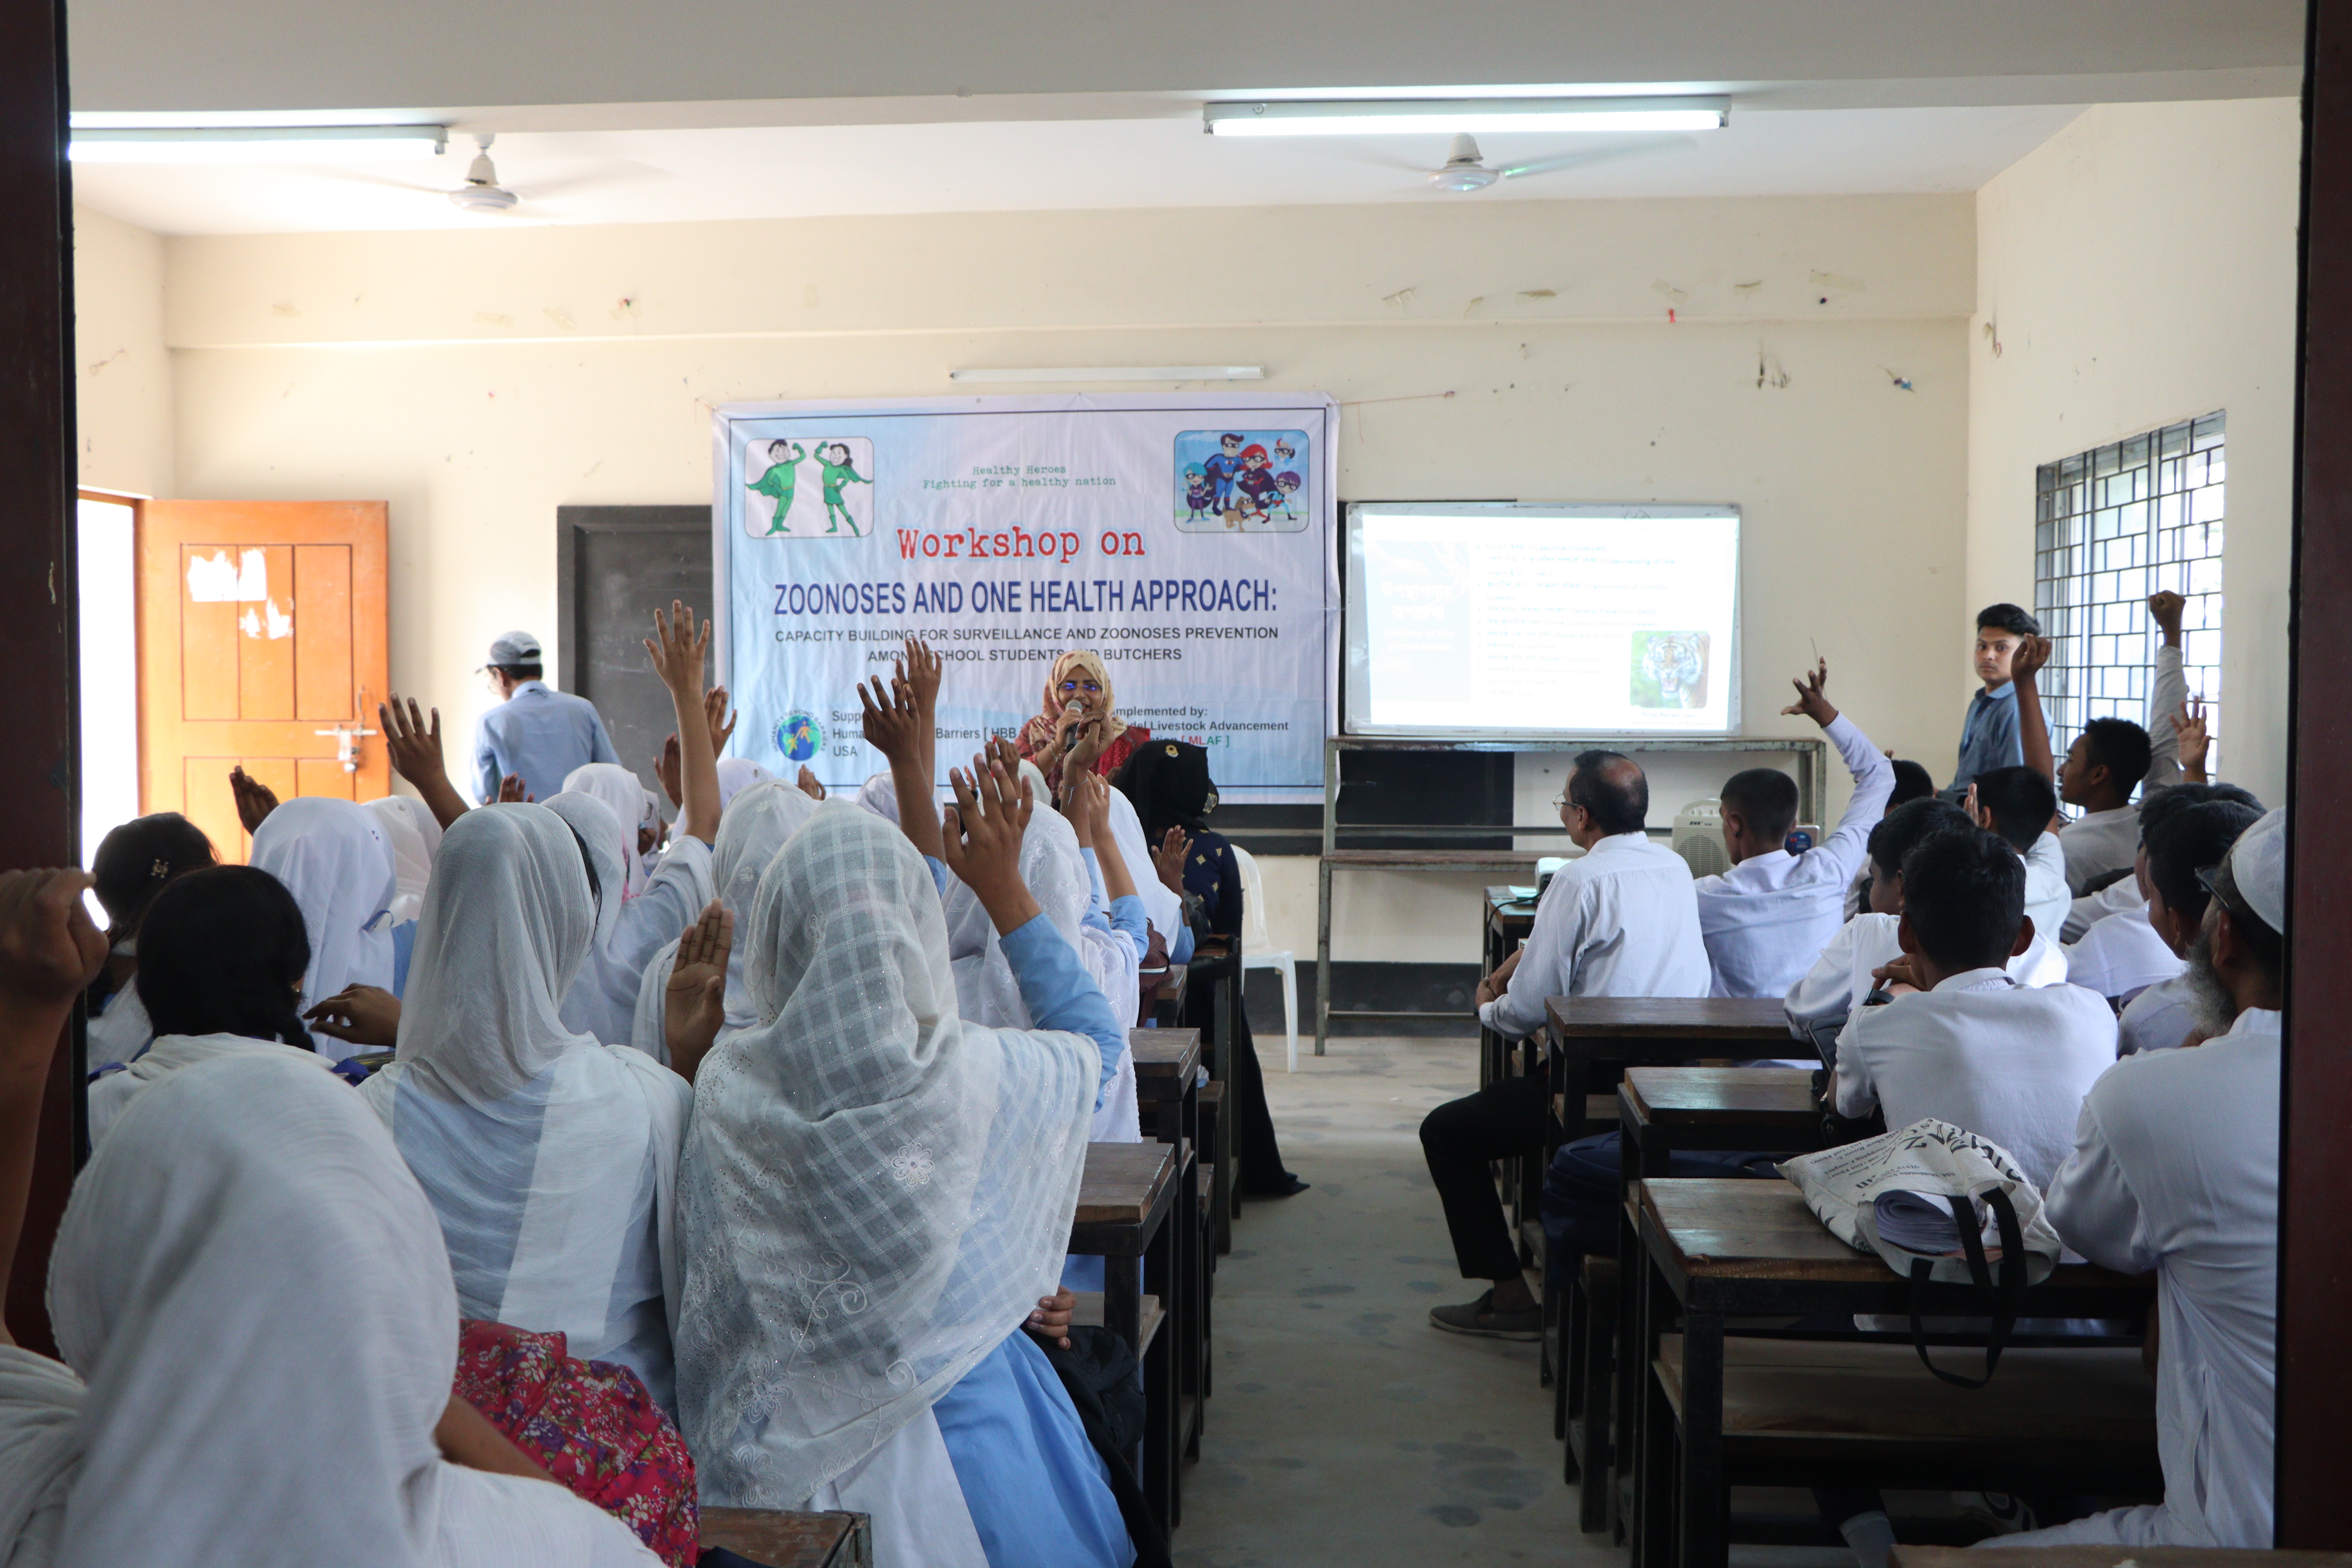 Capacity building for surveillance and zoonoses prevention among school students